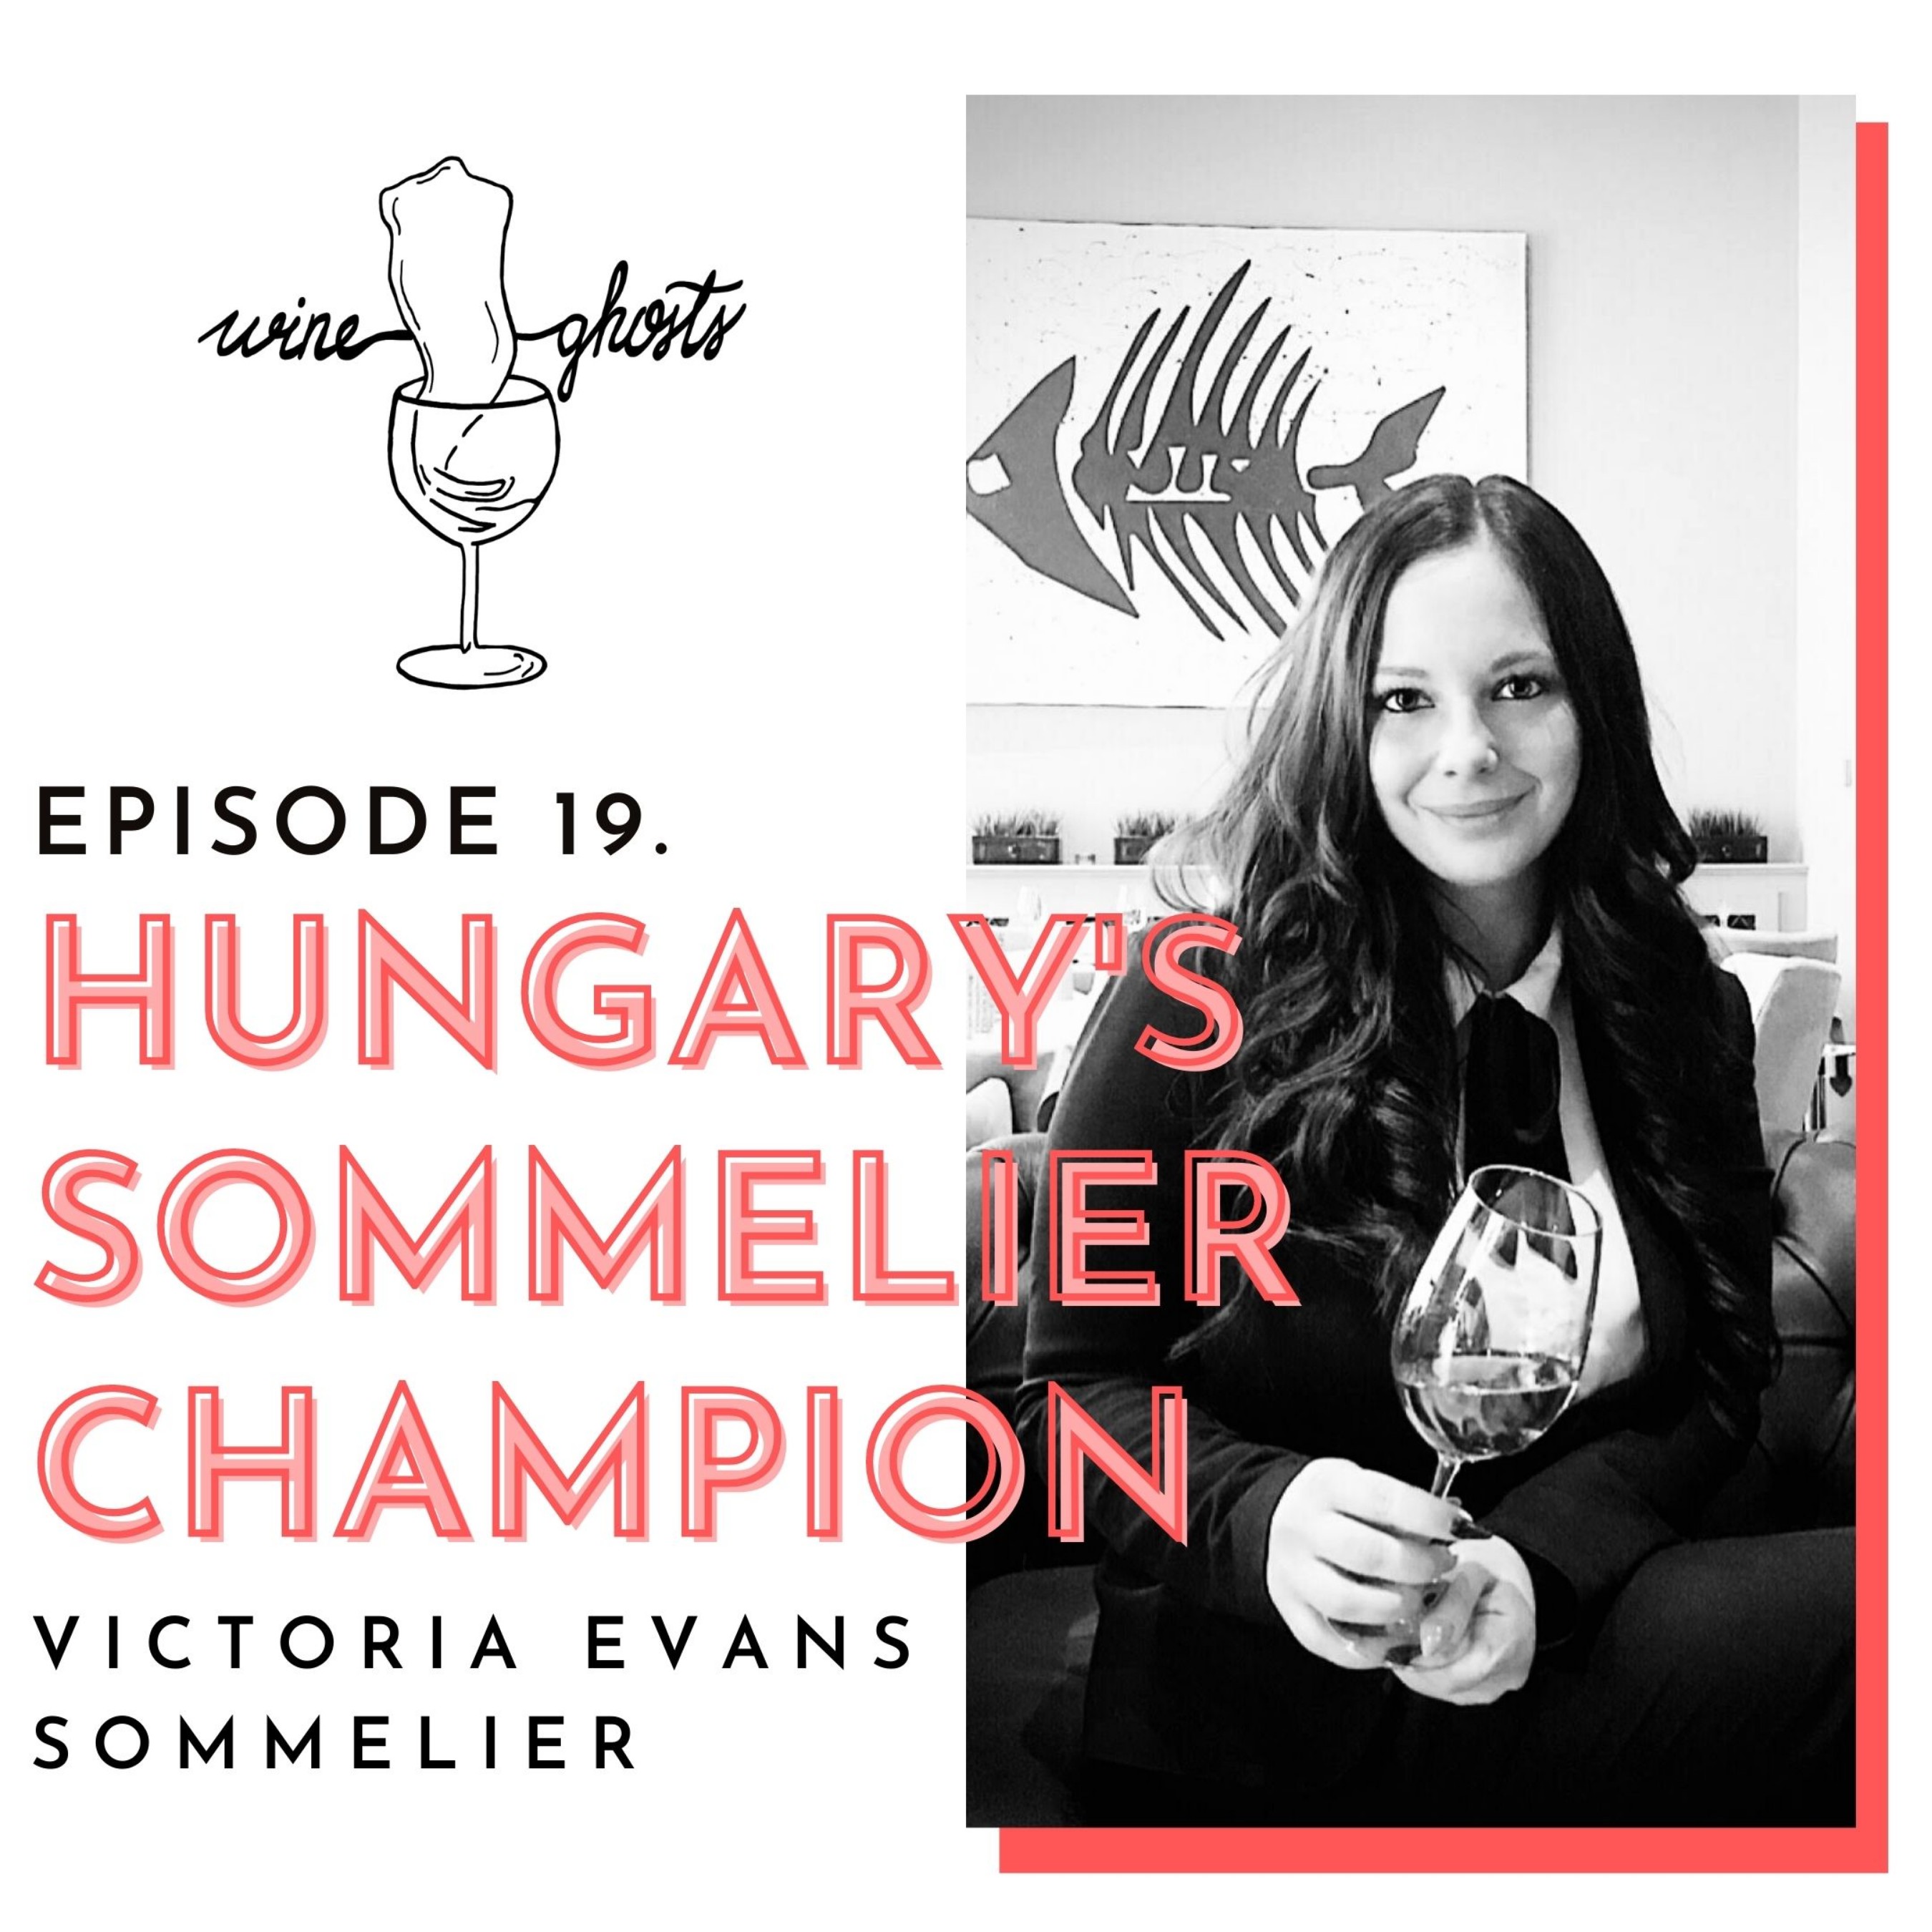 Ep. 19. / Victoria Evans changed the history of the Hungarian sommelier world